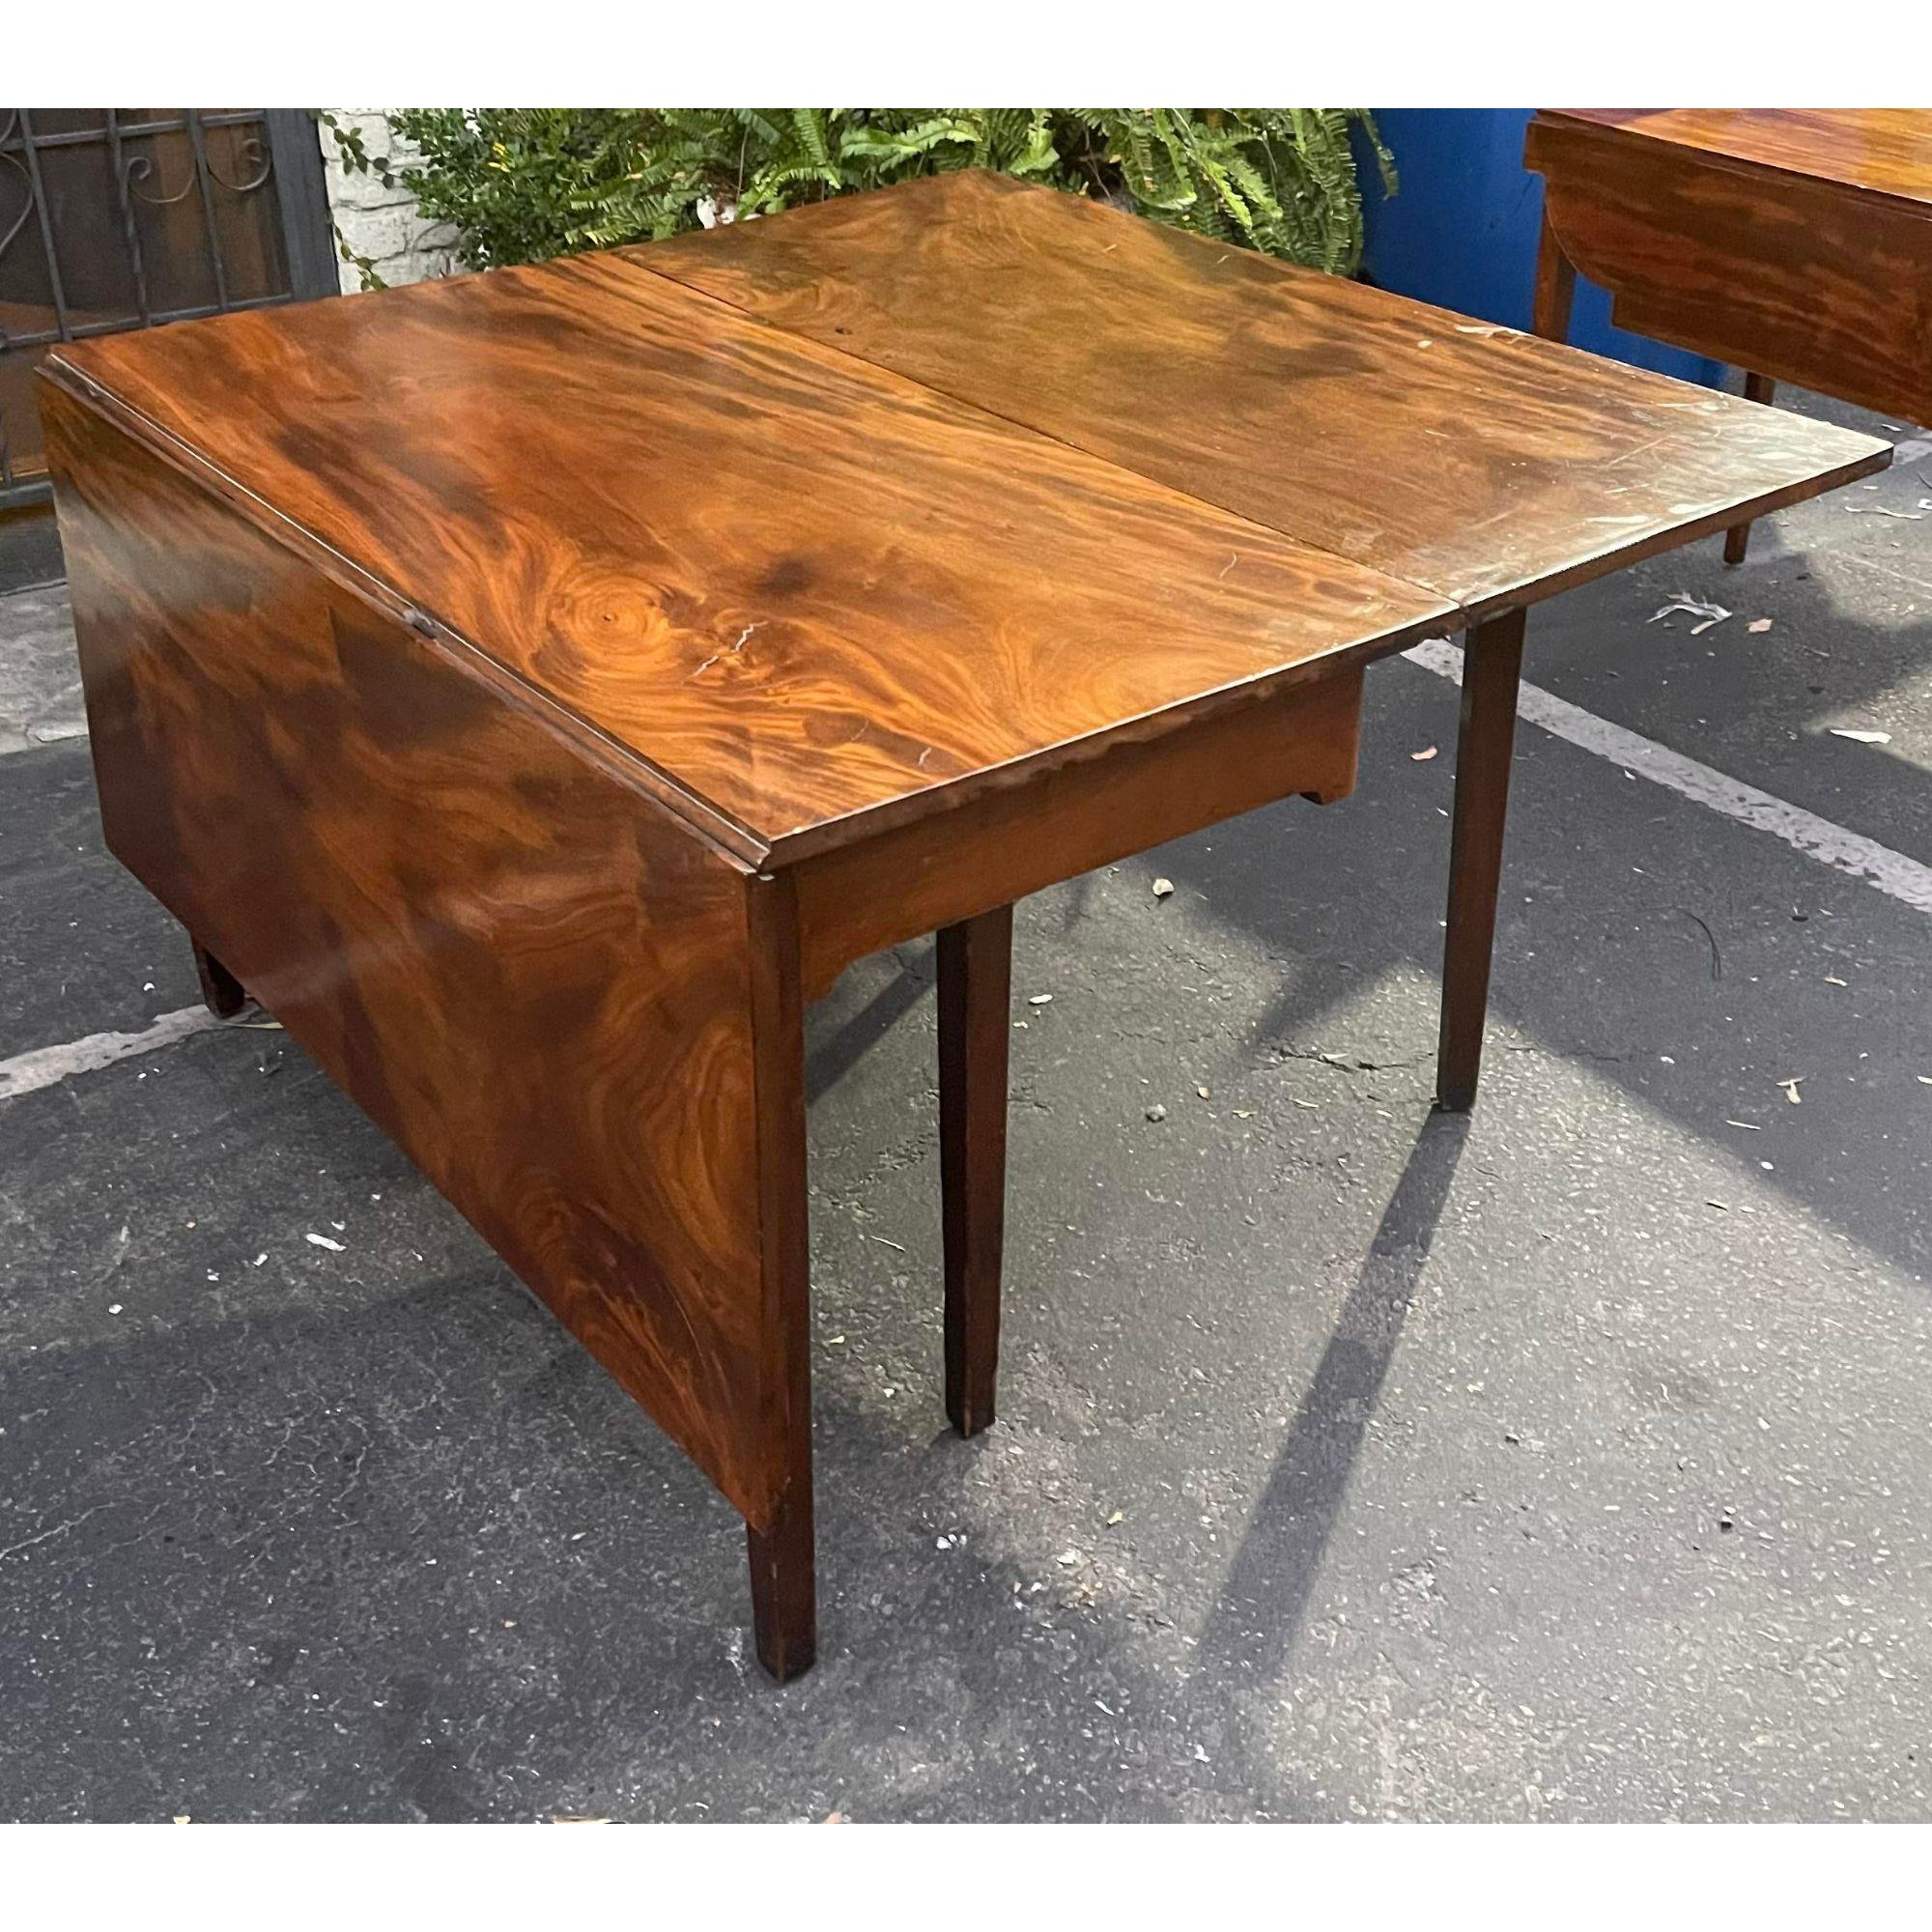 Antique English Honduran Mahogany Drop Lead Dining Table, Early 18th Century For Sale 1